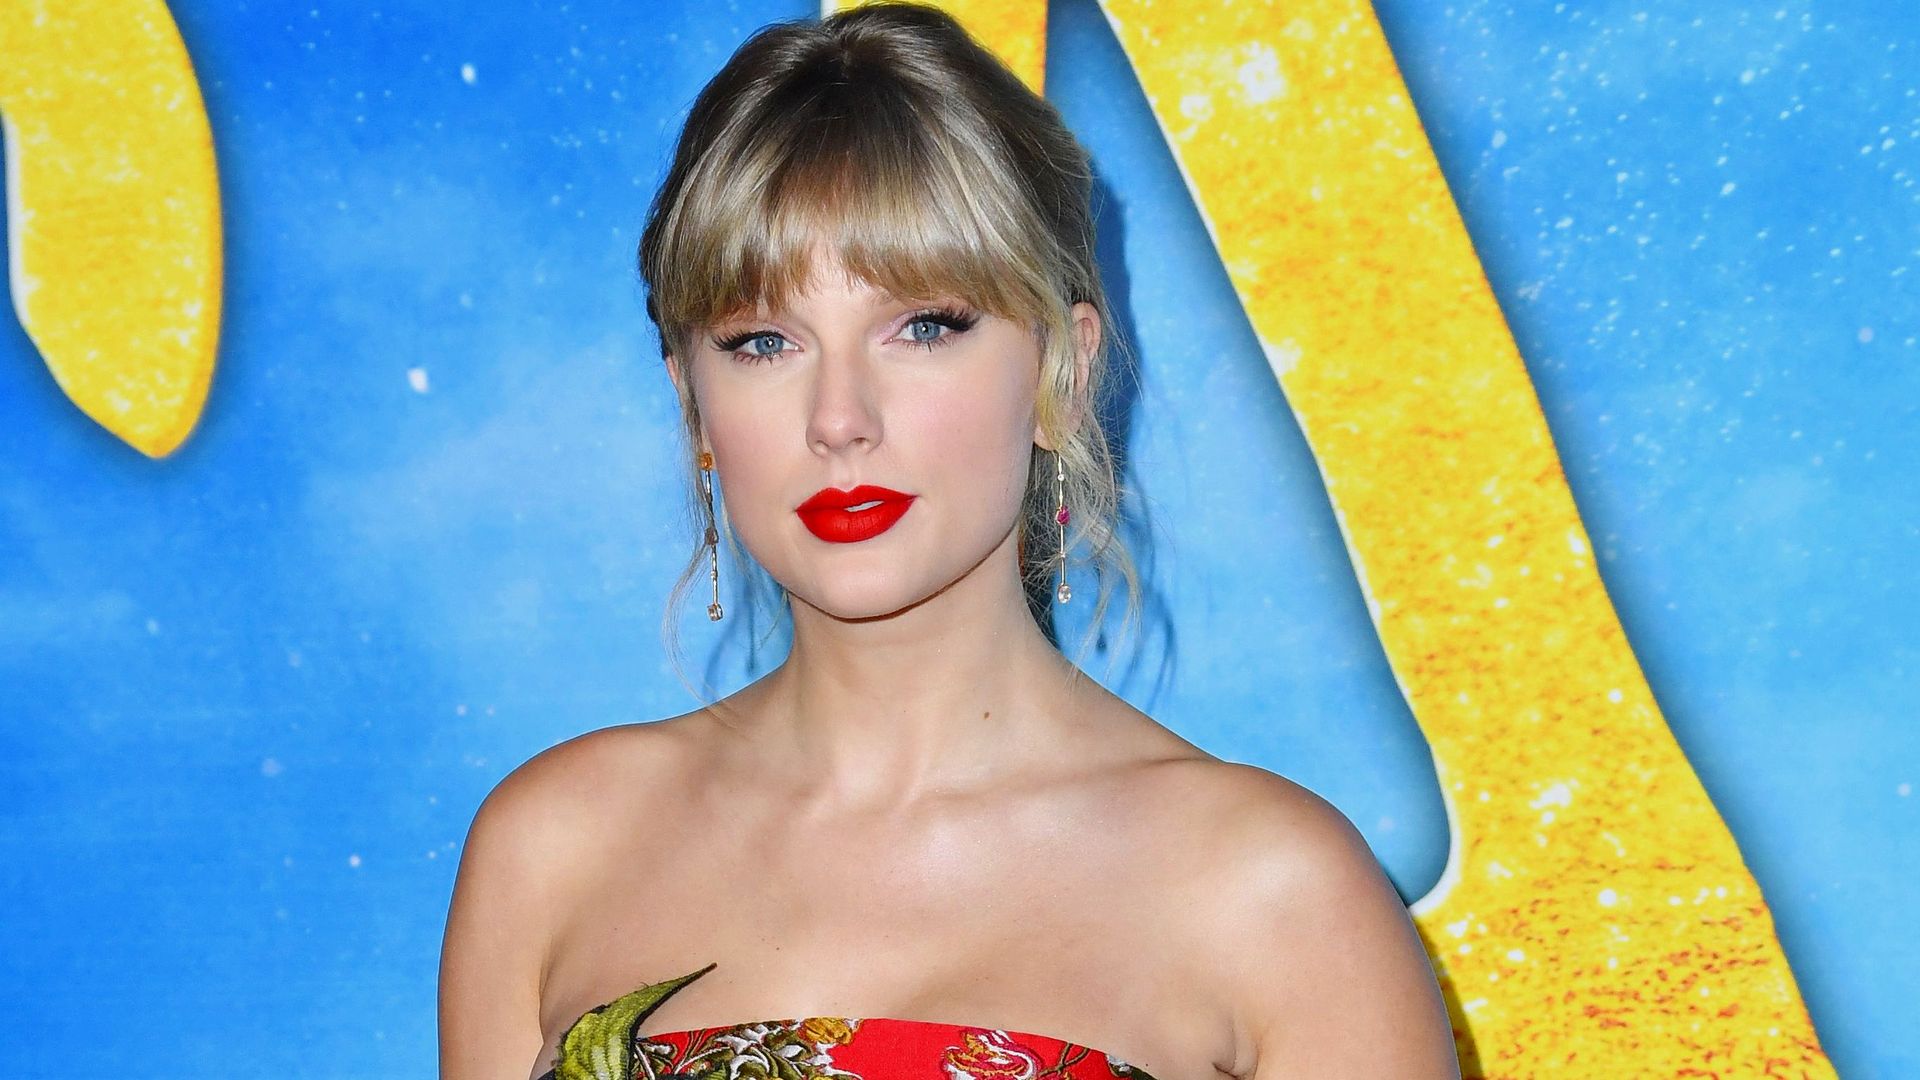 Taylor Swift in a red dress with floral design